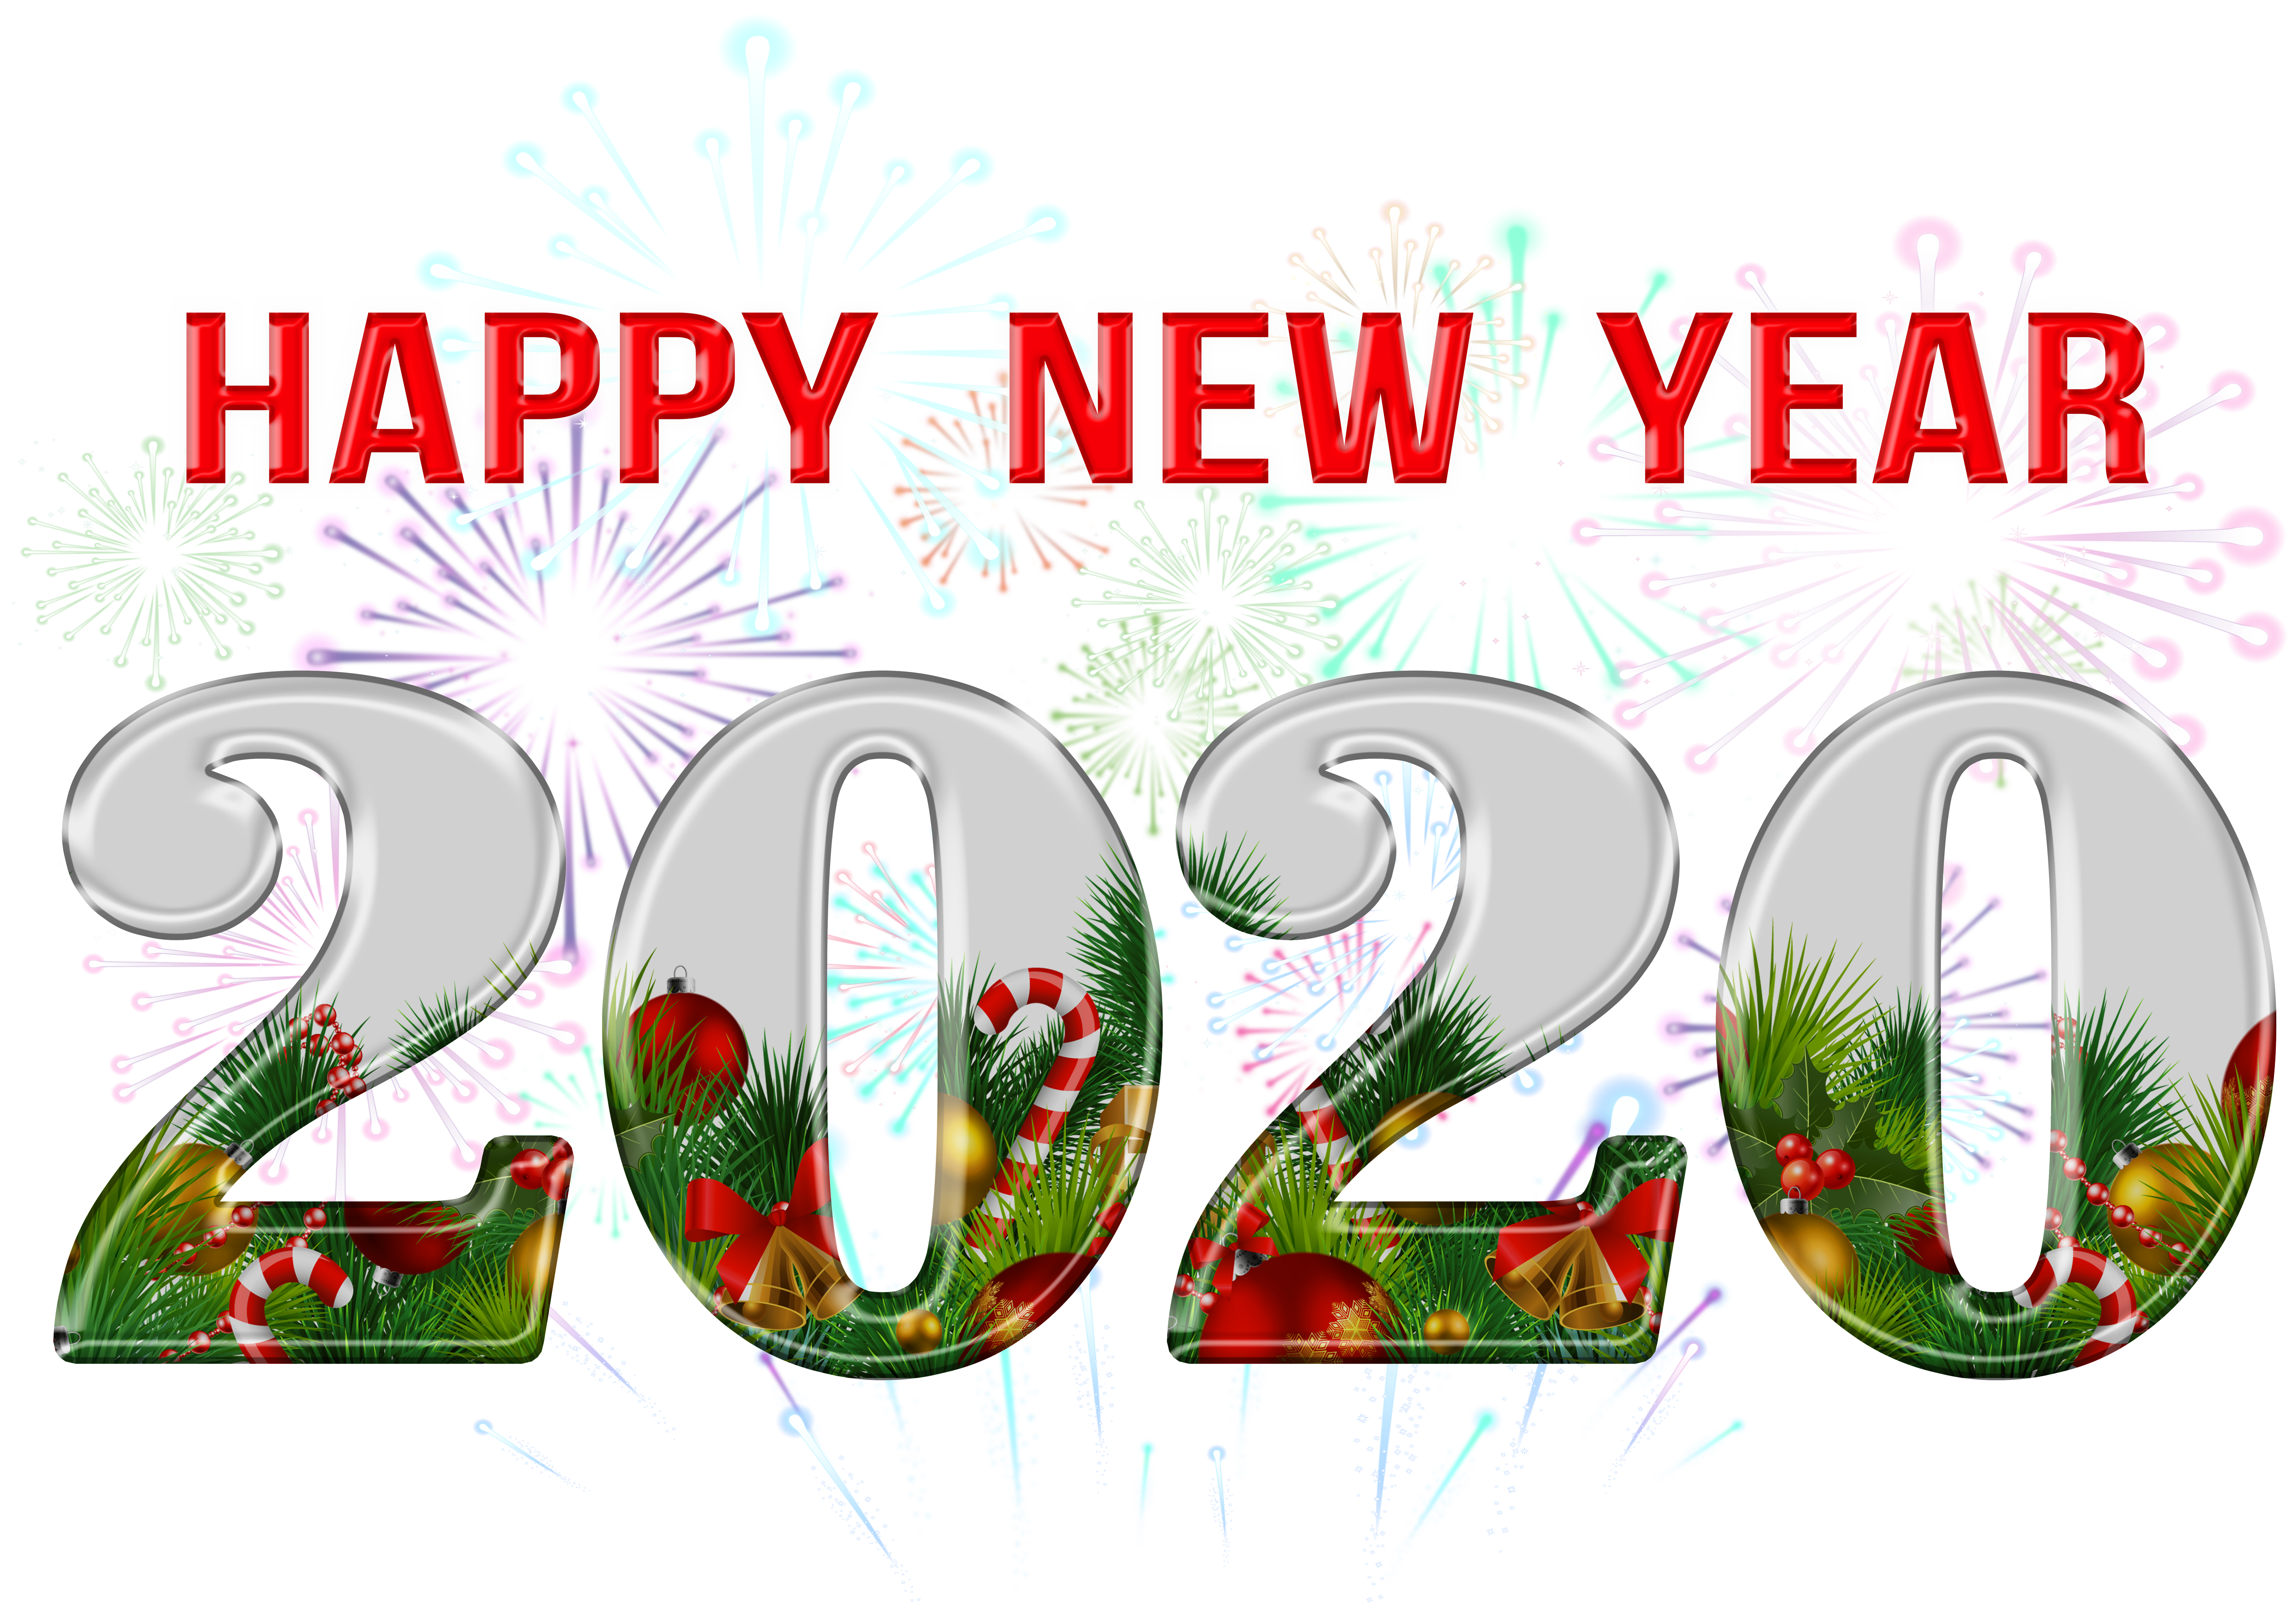 Happy New Year 2020 Clipart.